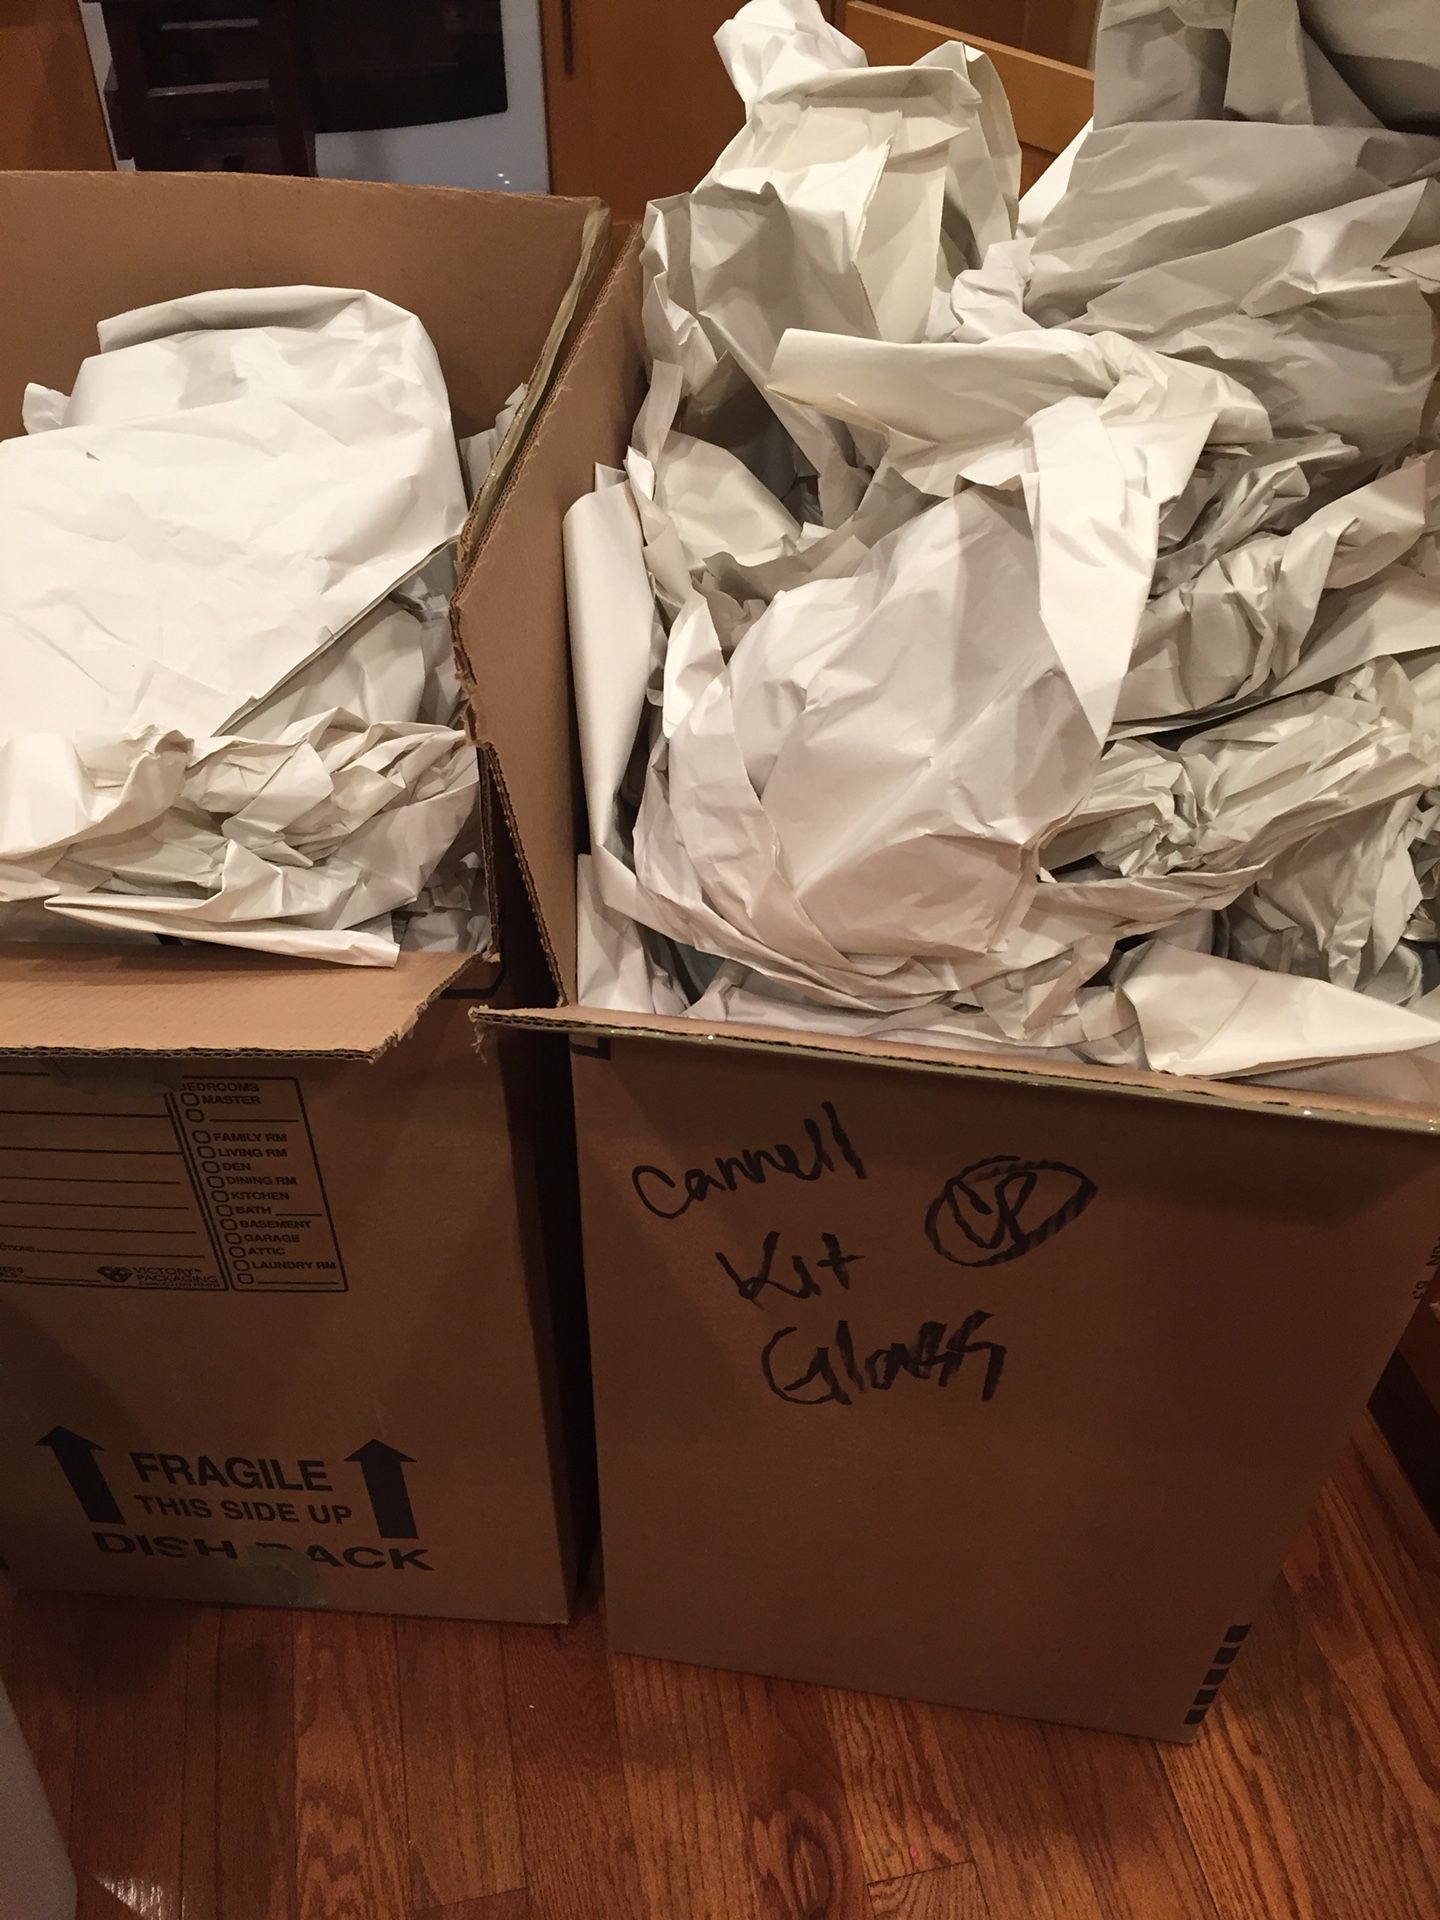 FREE moving boxes and paper